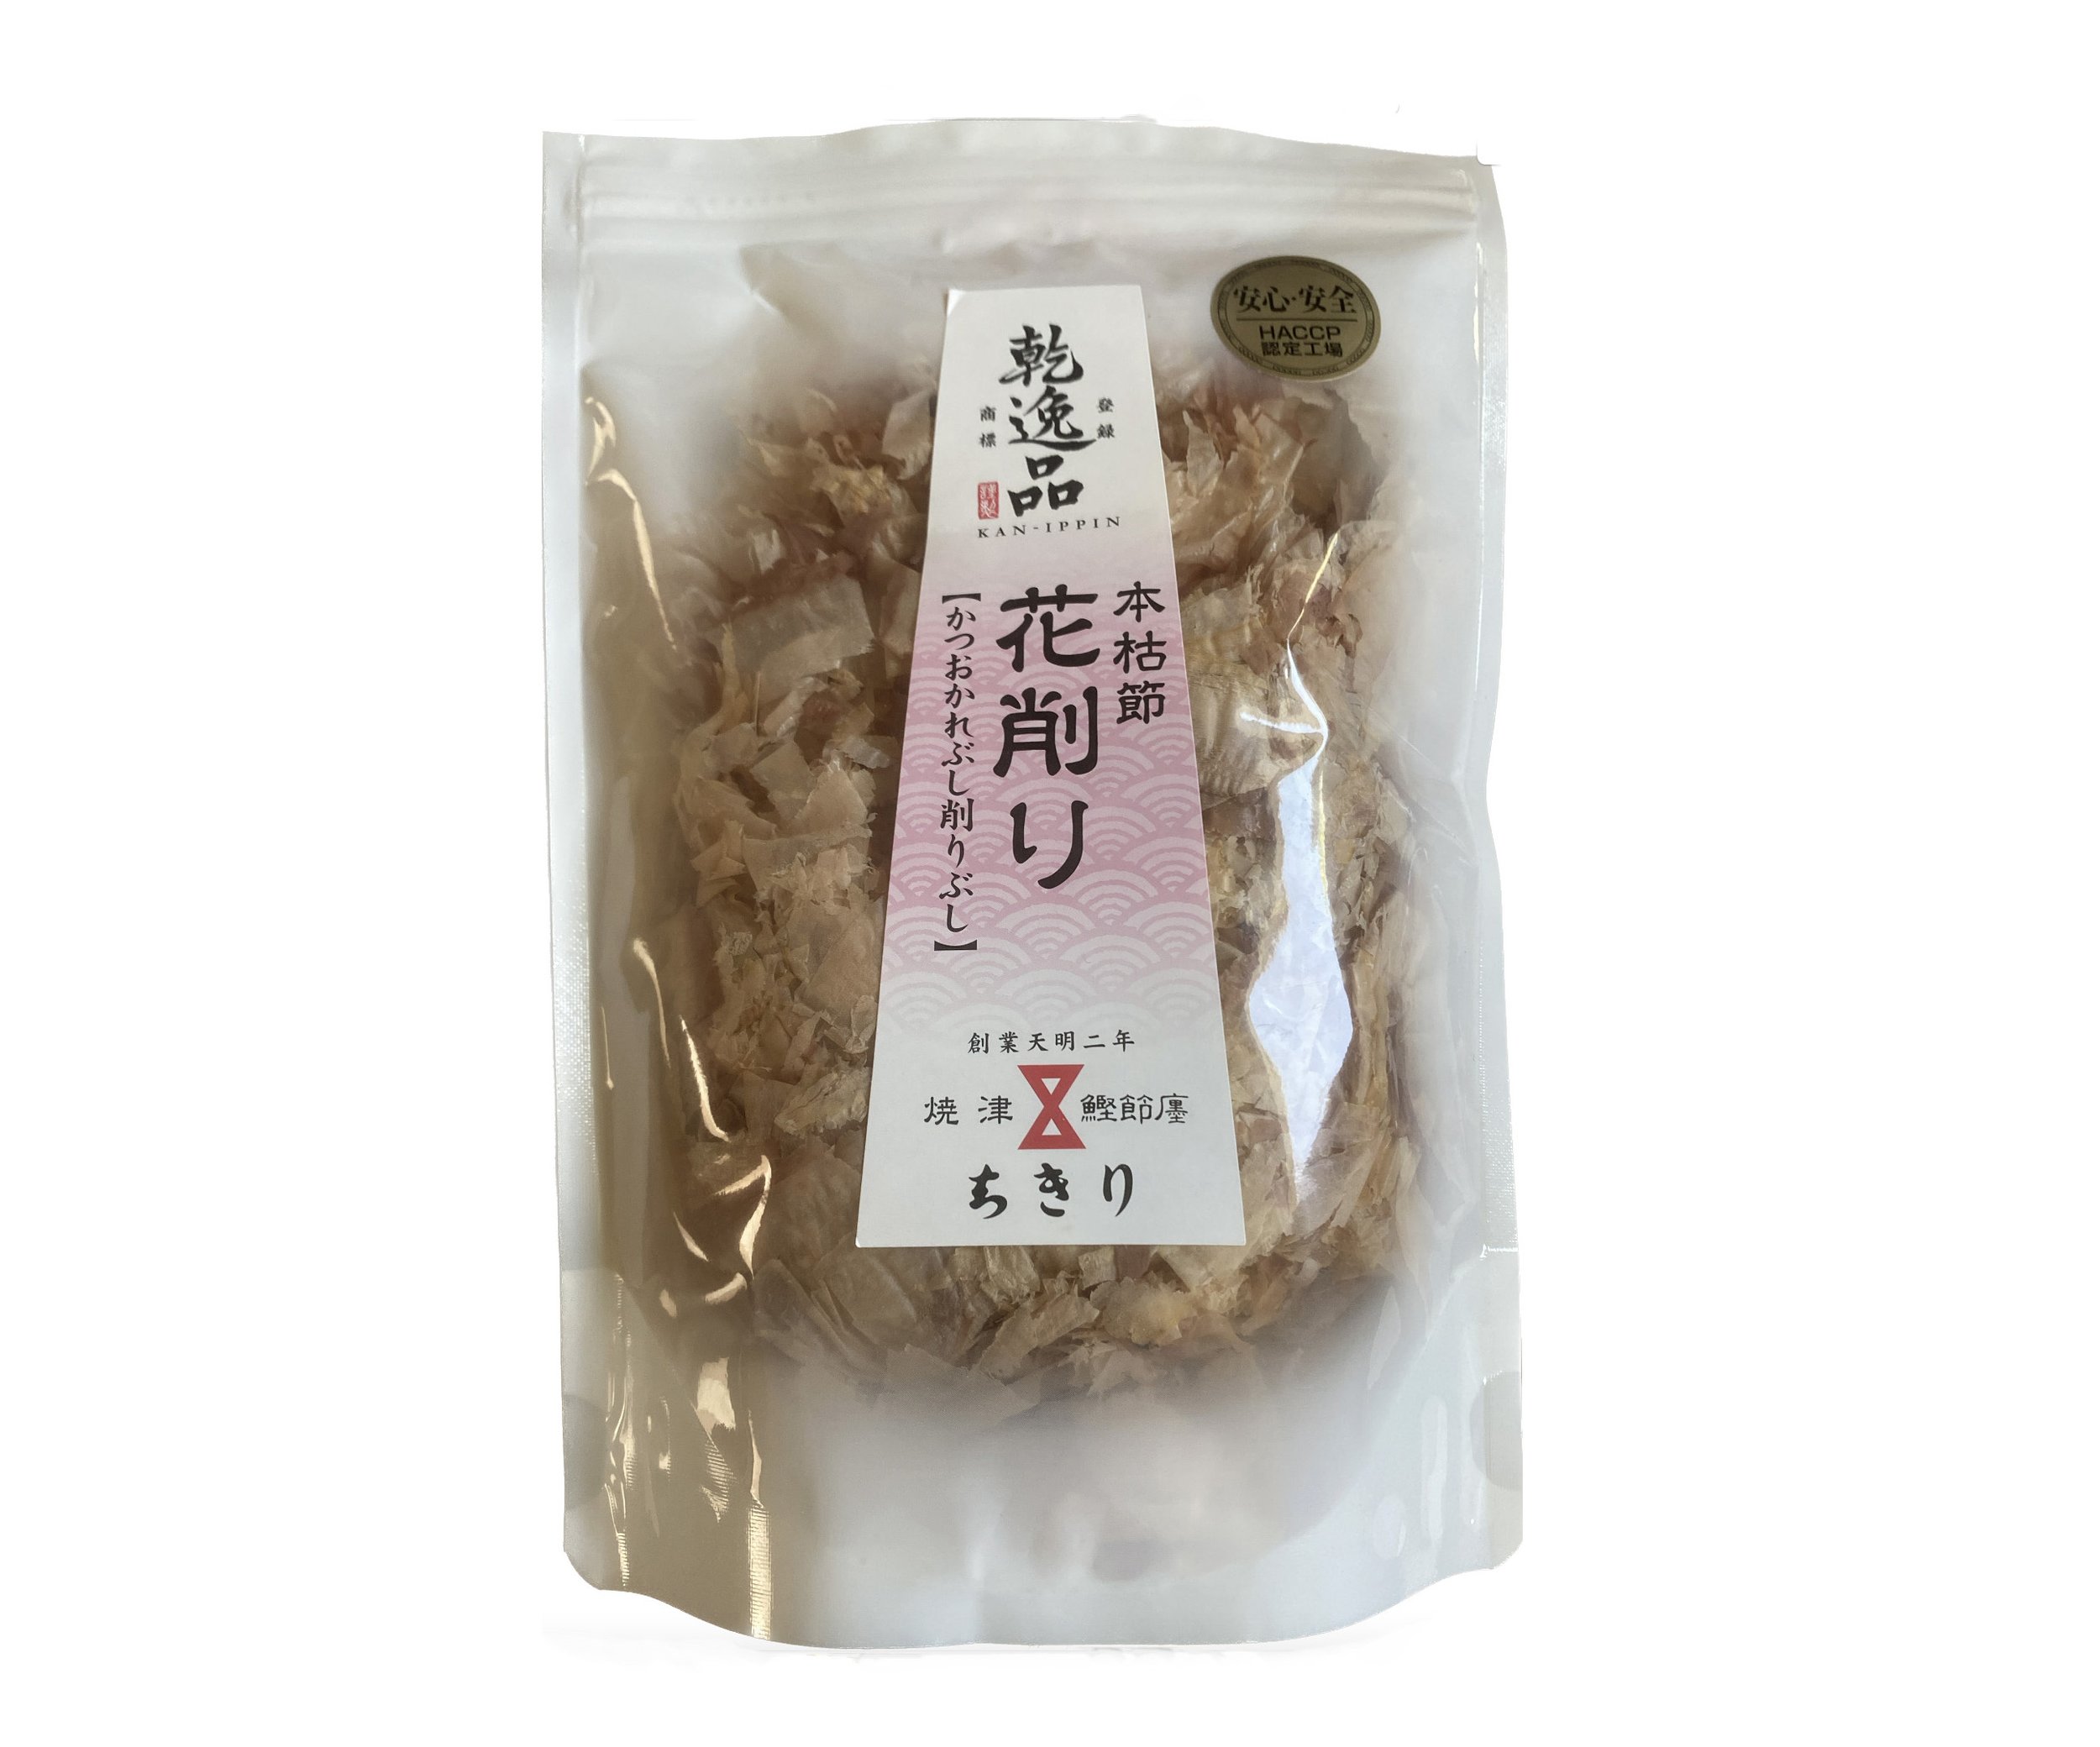 Katsuobushi (bonito flakes) will put a spring in your step and